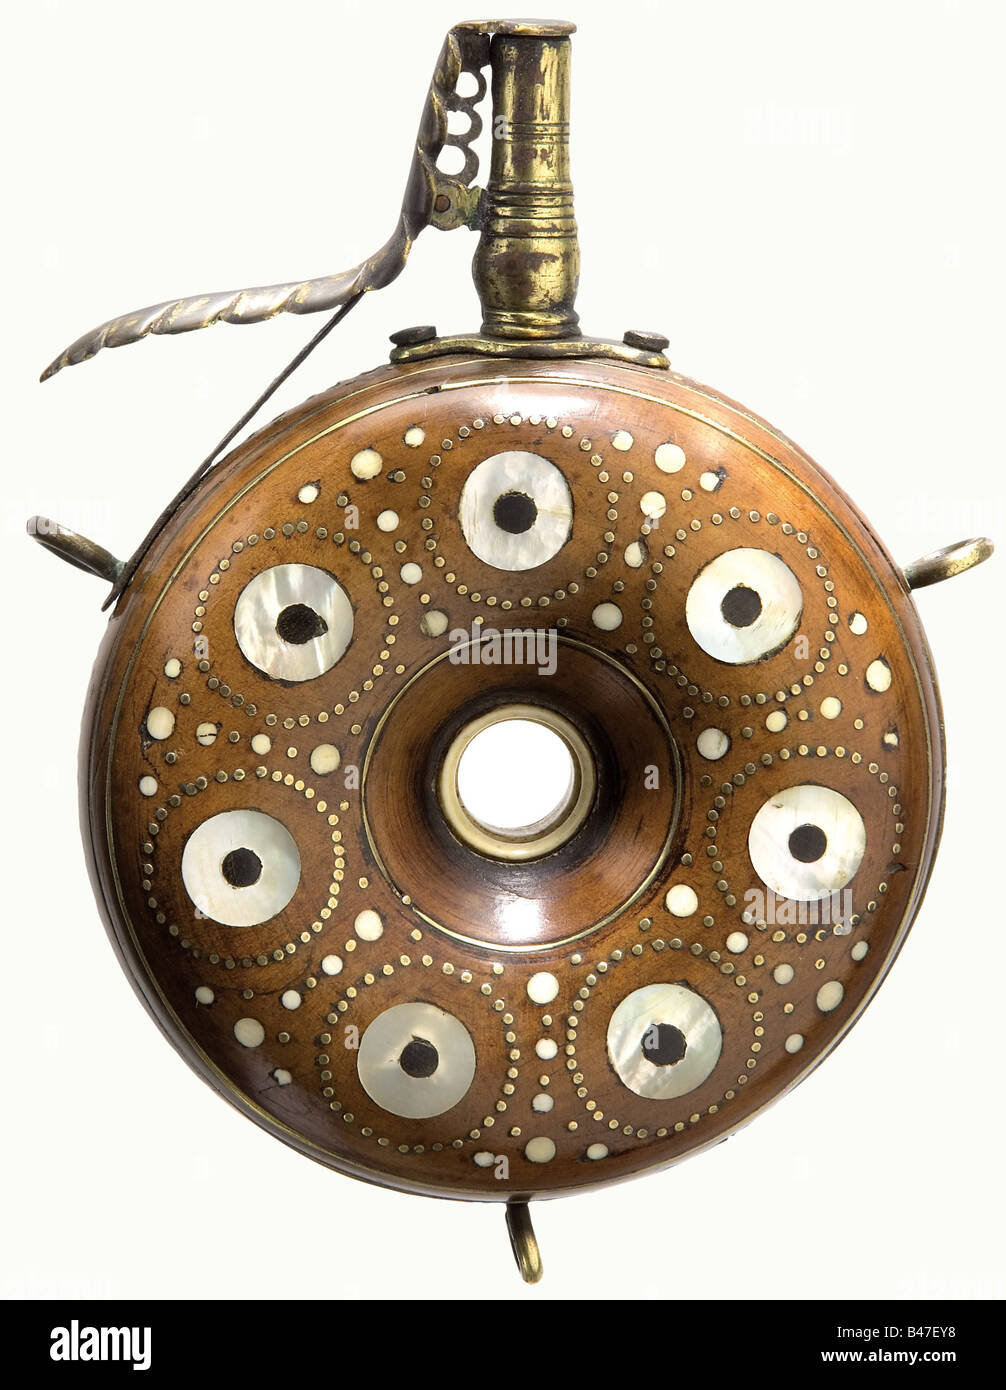 A German priming flask, circa 1600. Ring shaped fruitwood body richly inlaid with brass, mother-of-pearl, bone, and black horn. Spring-loaded fire-gilded brass nozzle. Three carrying rings. Size 16.5 cm. historic, historical, 17th century, powder flask, accessory, accessories, military, militaria, object, objects, stills, utilities, utility, clipping, clippings, cut out, cut-out, cut-outs, utensil, piece of equipment, utensils, vessel, vessels, Stock Photo